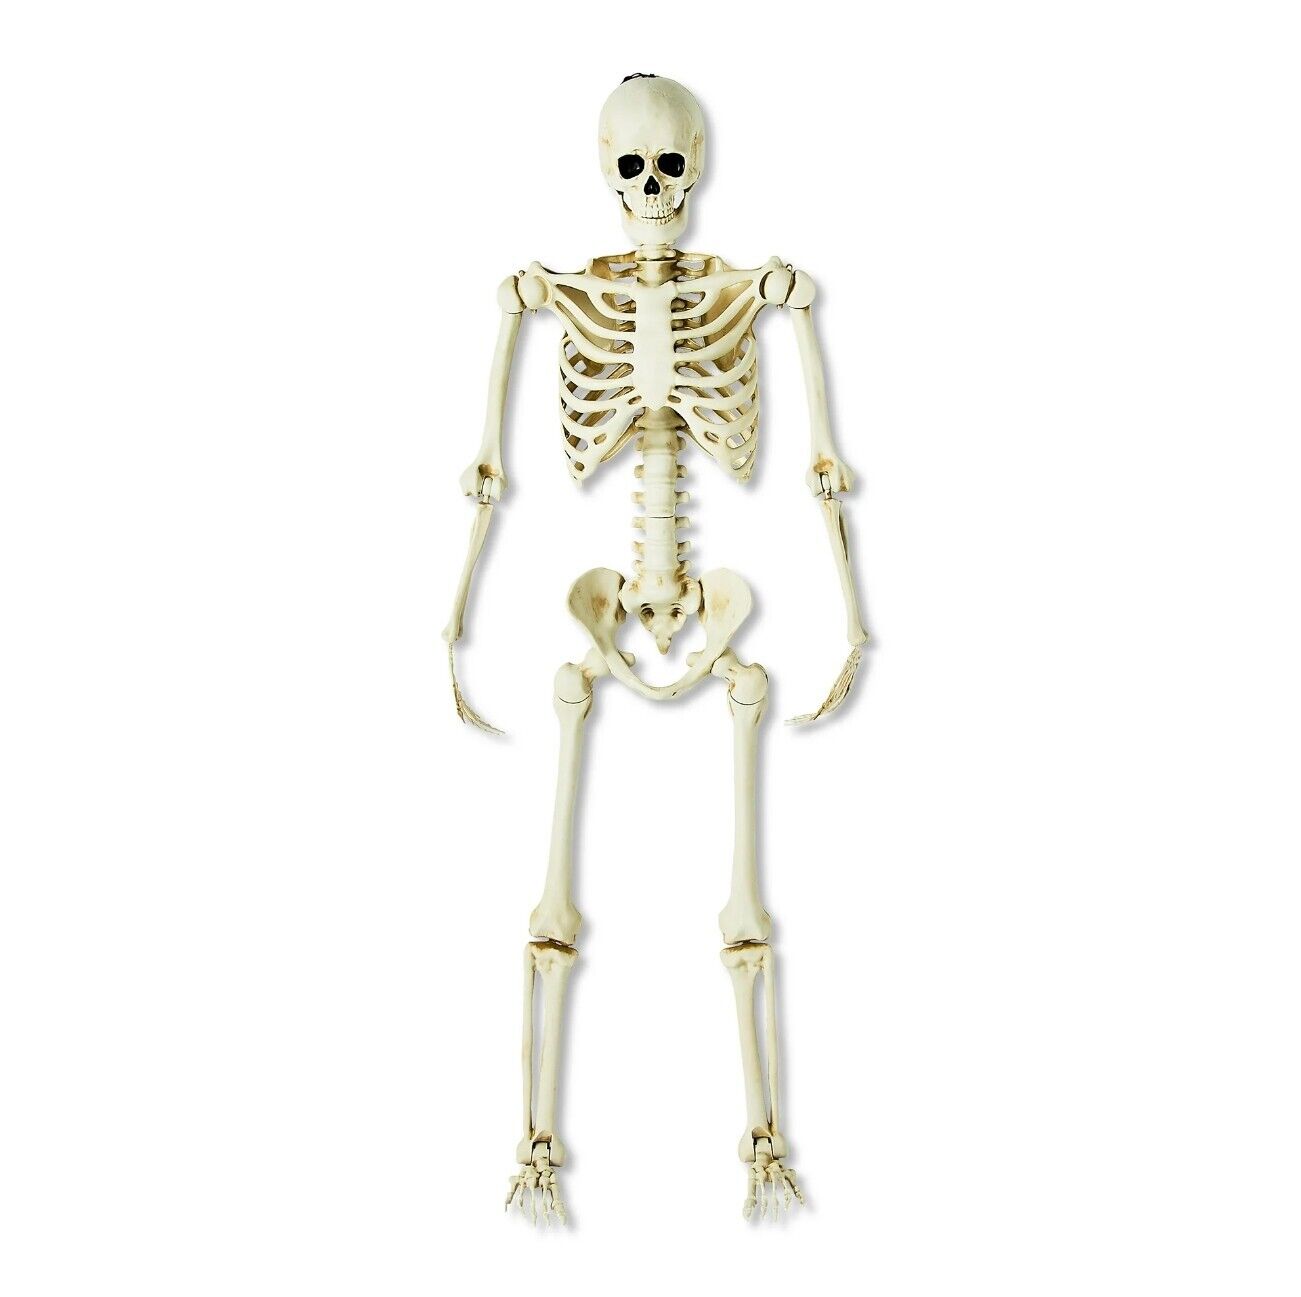 5 ft. Halloween Skeleton Posable Hanging Decor Indoor Outdoor Scary, Bone Color